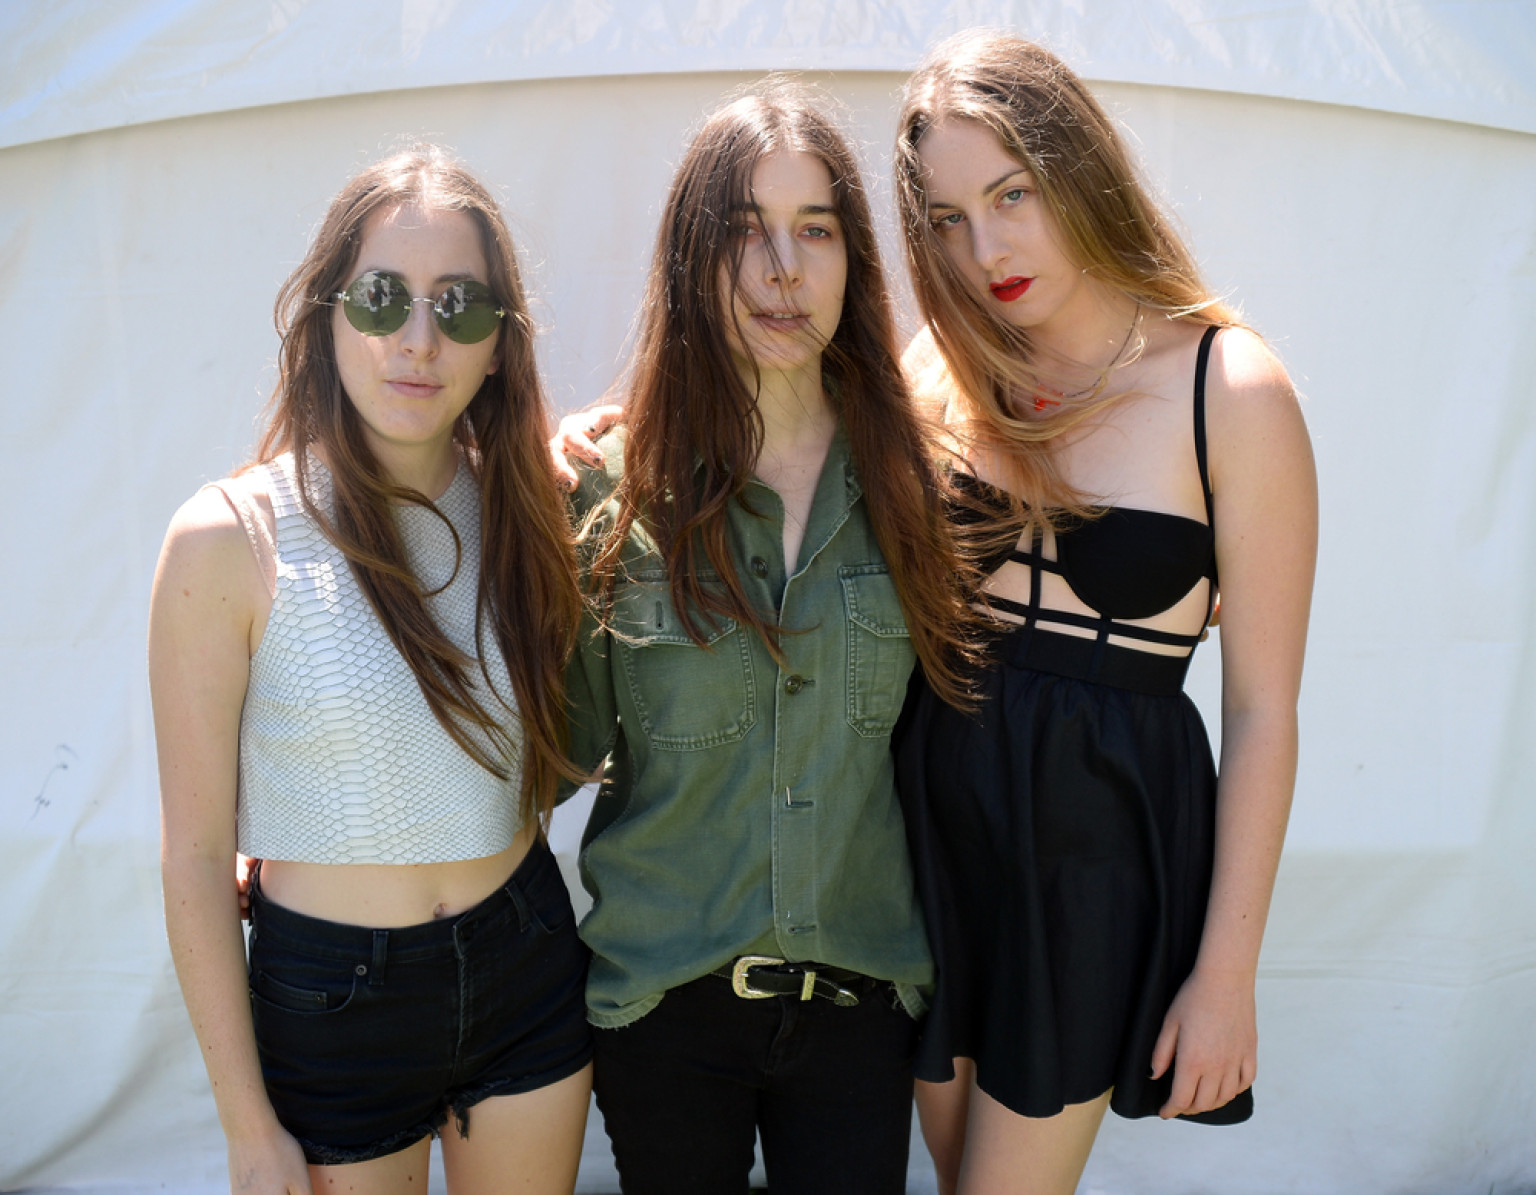 Haim #39 s #39 The Wire #39 Video: Sister Trio Breaks Hearts In New Music Video